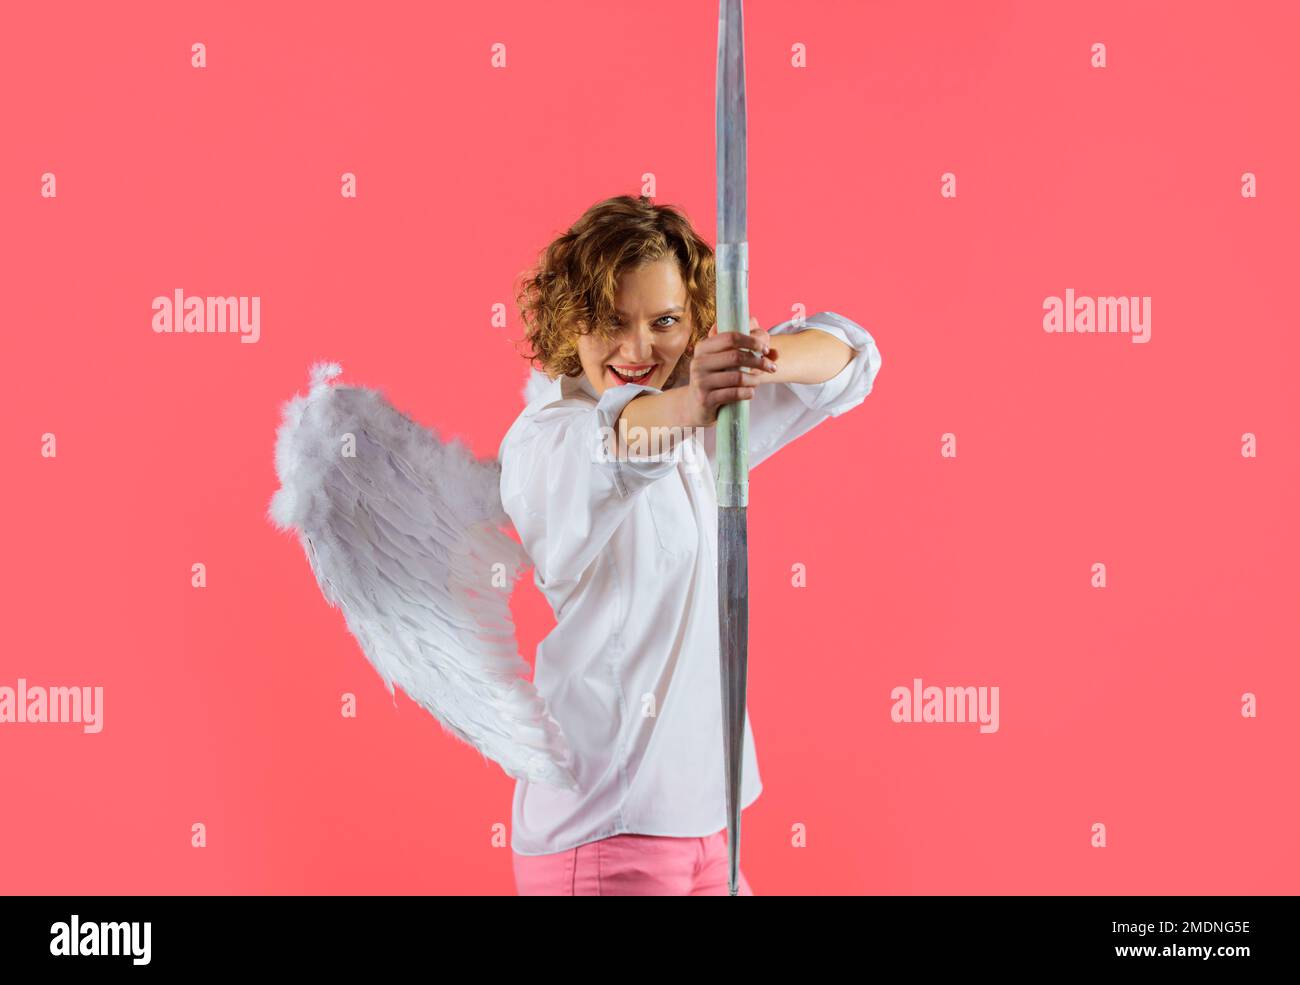 Cupid in valentines day. Female angel in white wings shooting with bow and arrow. Arrows of love. Stock Photo